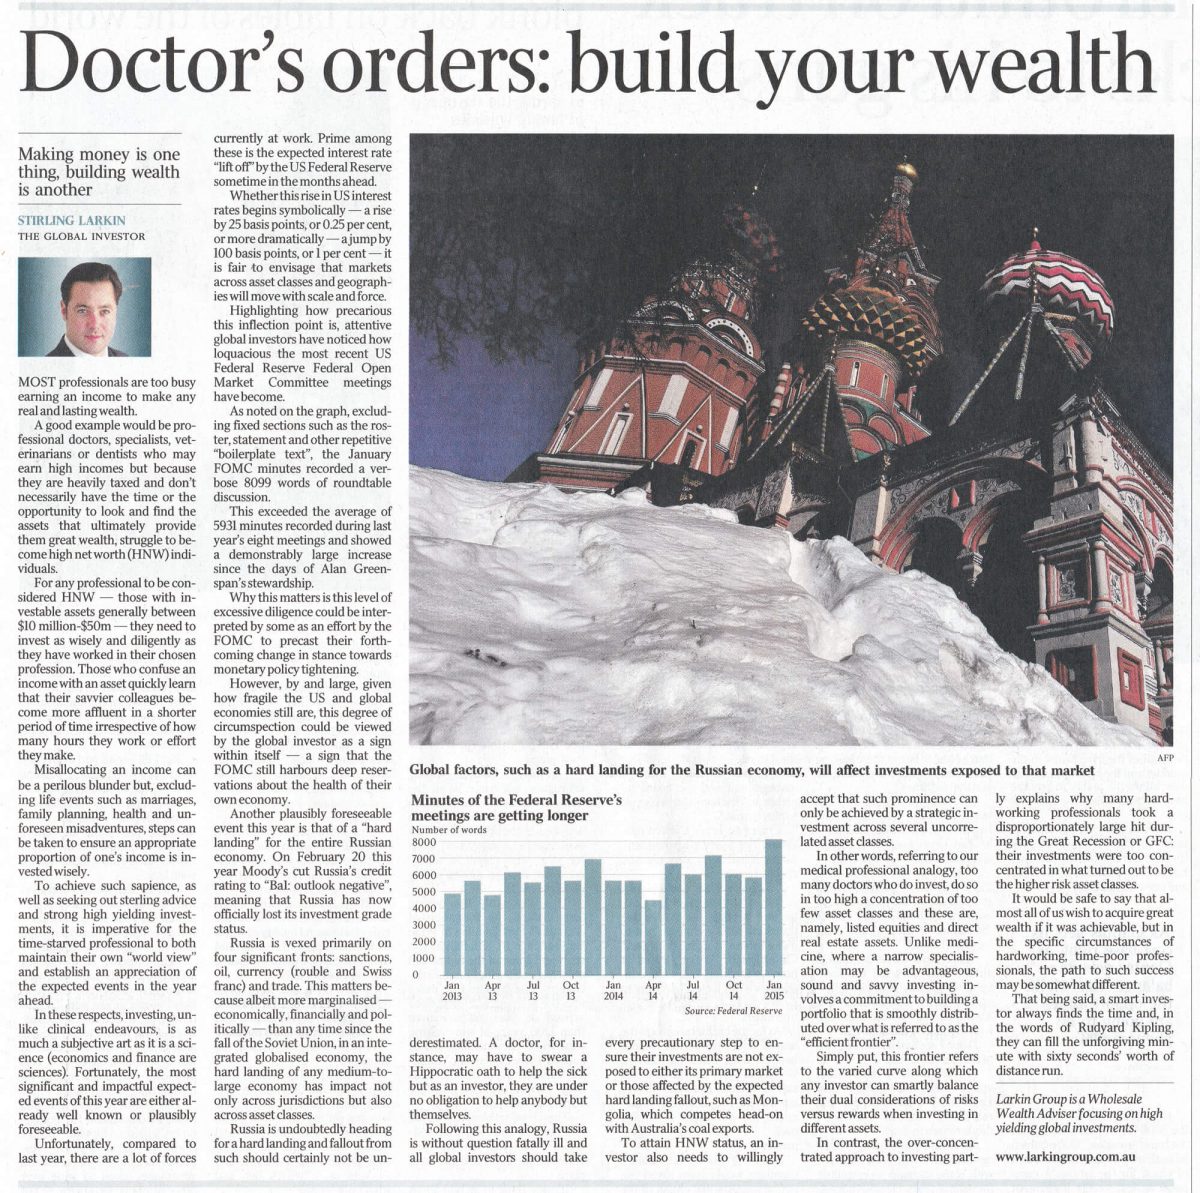 australian standfirst discusses building wealth in 2015 in the australian newspaper